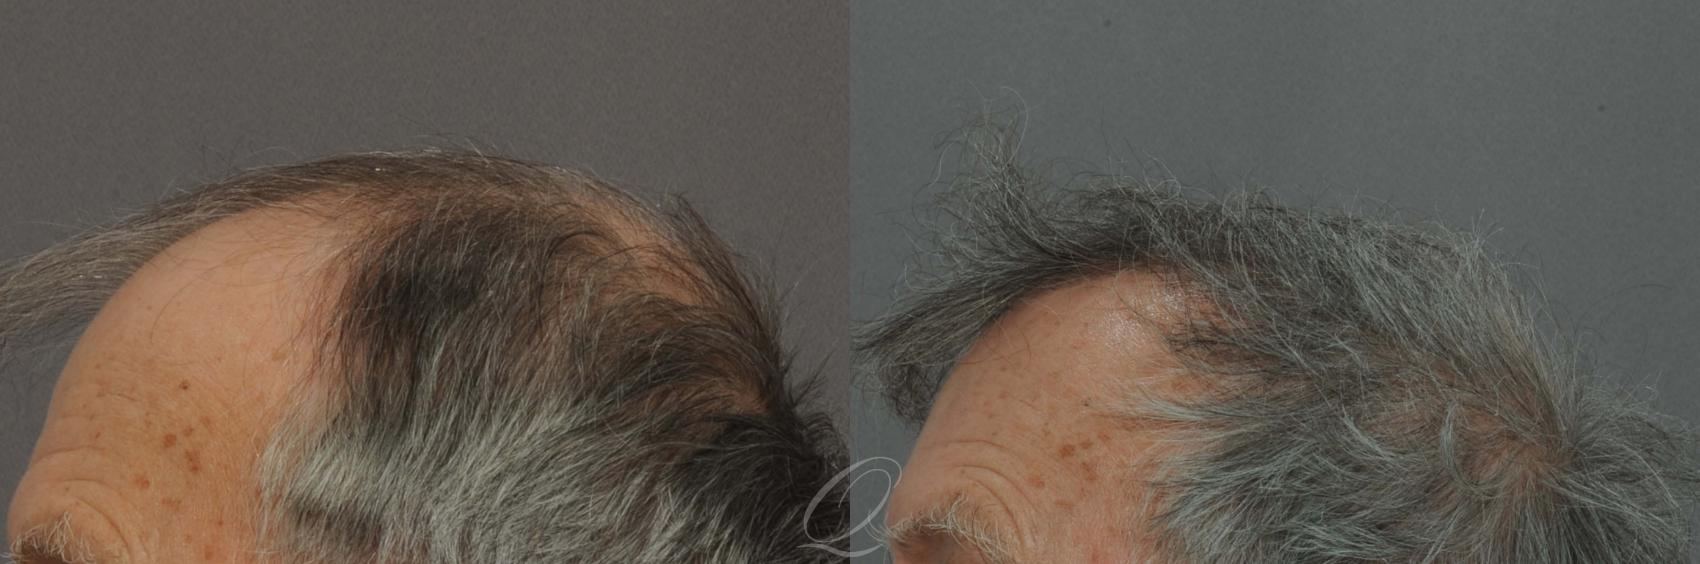 FUT Case 1026 Before & After View #2 | Rochester, NY | Quatela Center for Hair Restoration